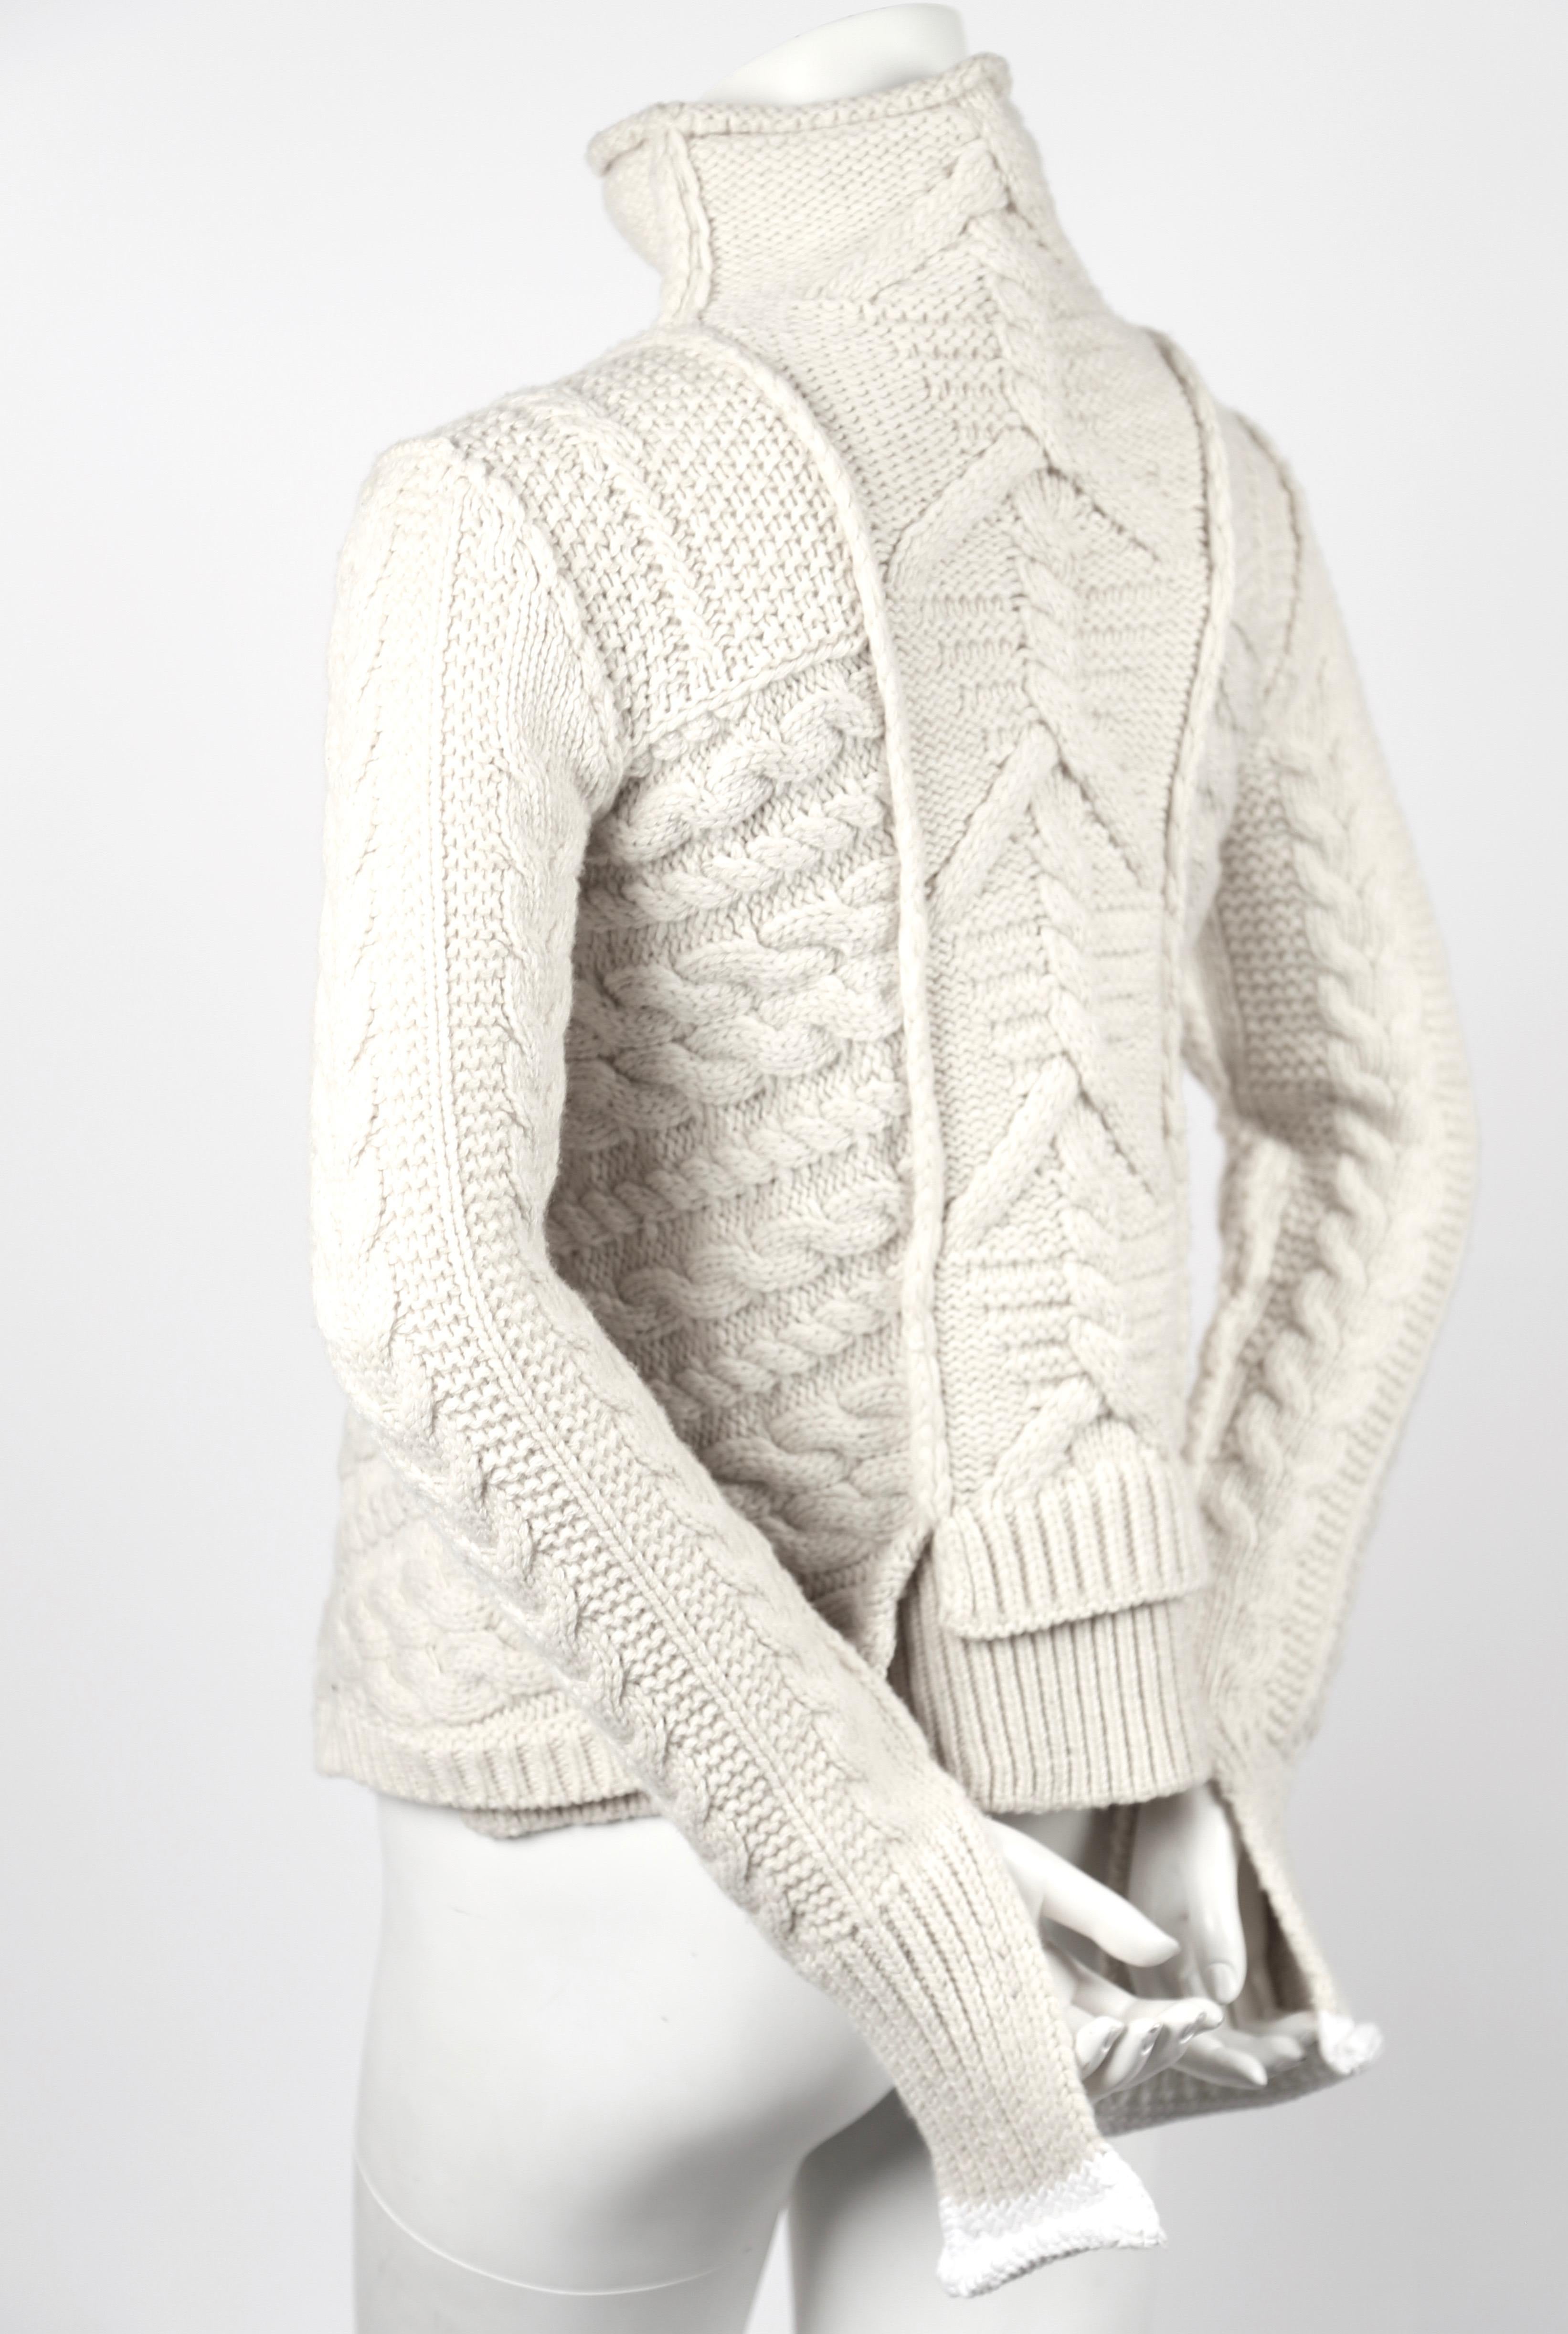 Very rare cream cable knit sweater with asymmetric hemline designed by Phoebe Philo for Celine dating to Fall of 2011. Labeled a size 'M' however this sweater runs small and best fits a size extra-small or small. Approximate measurements